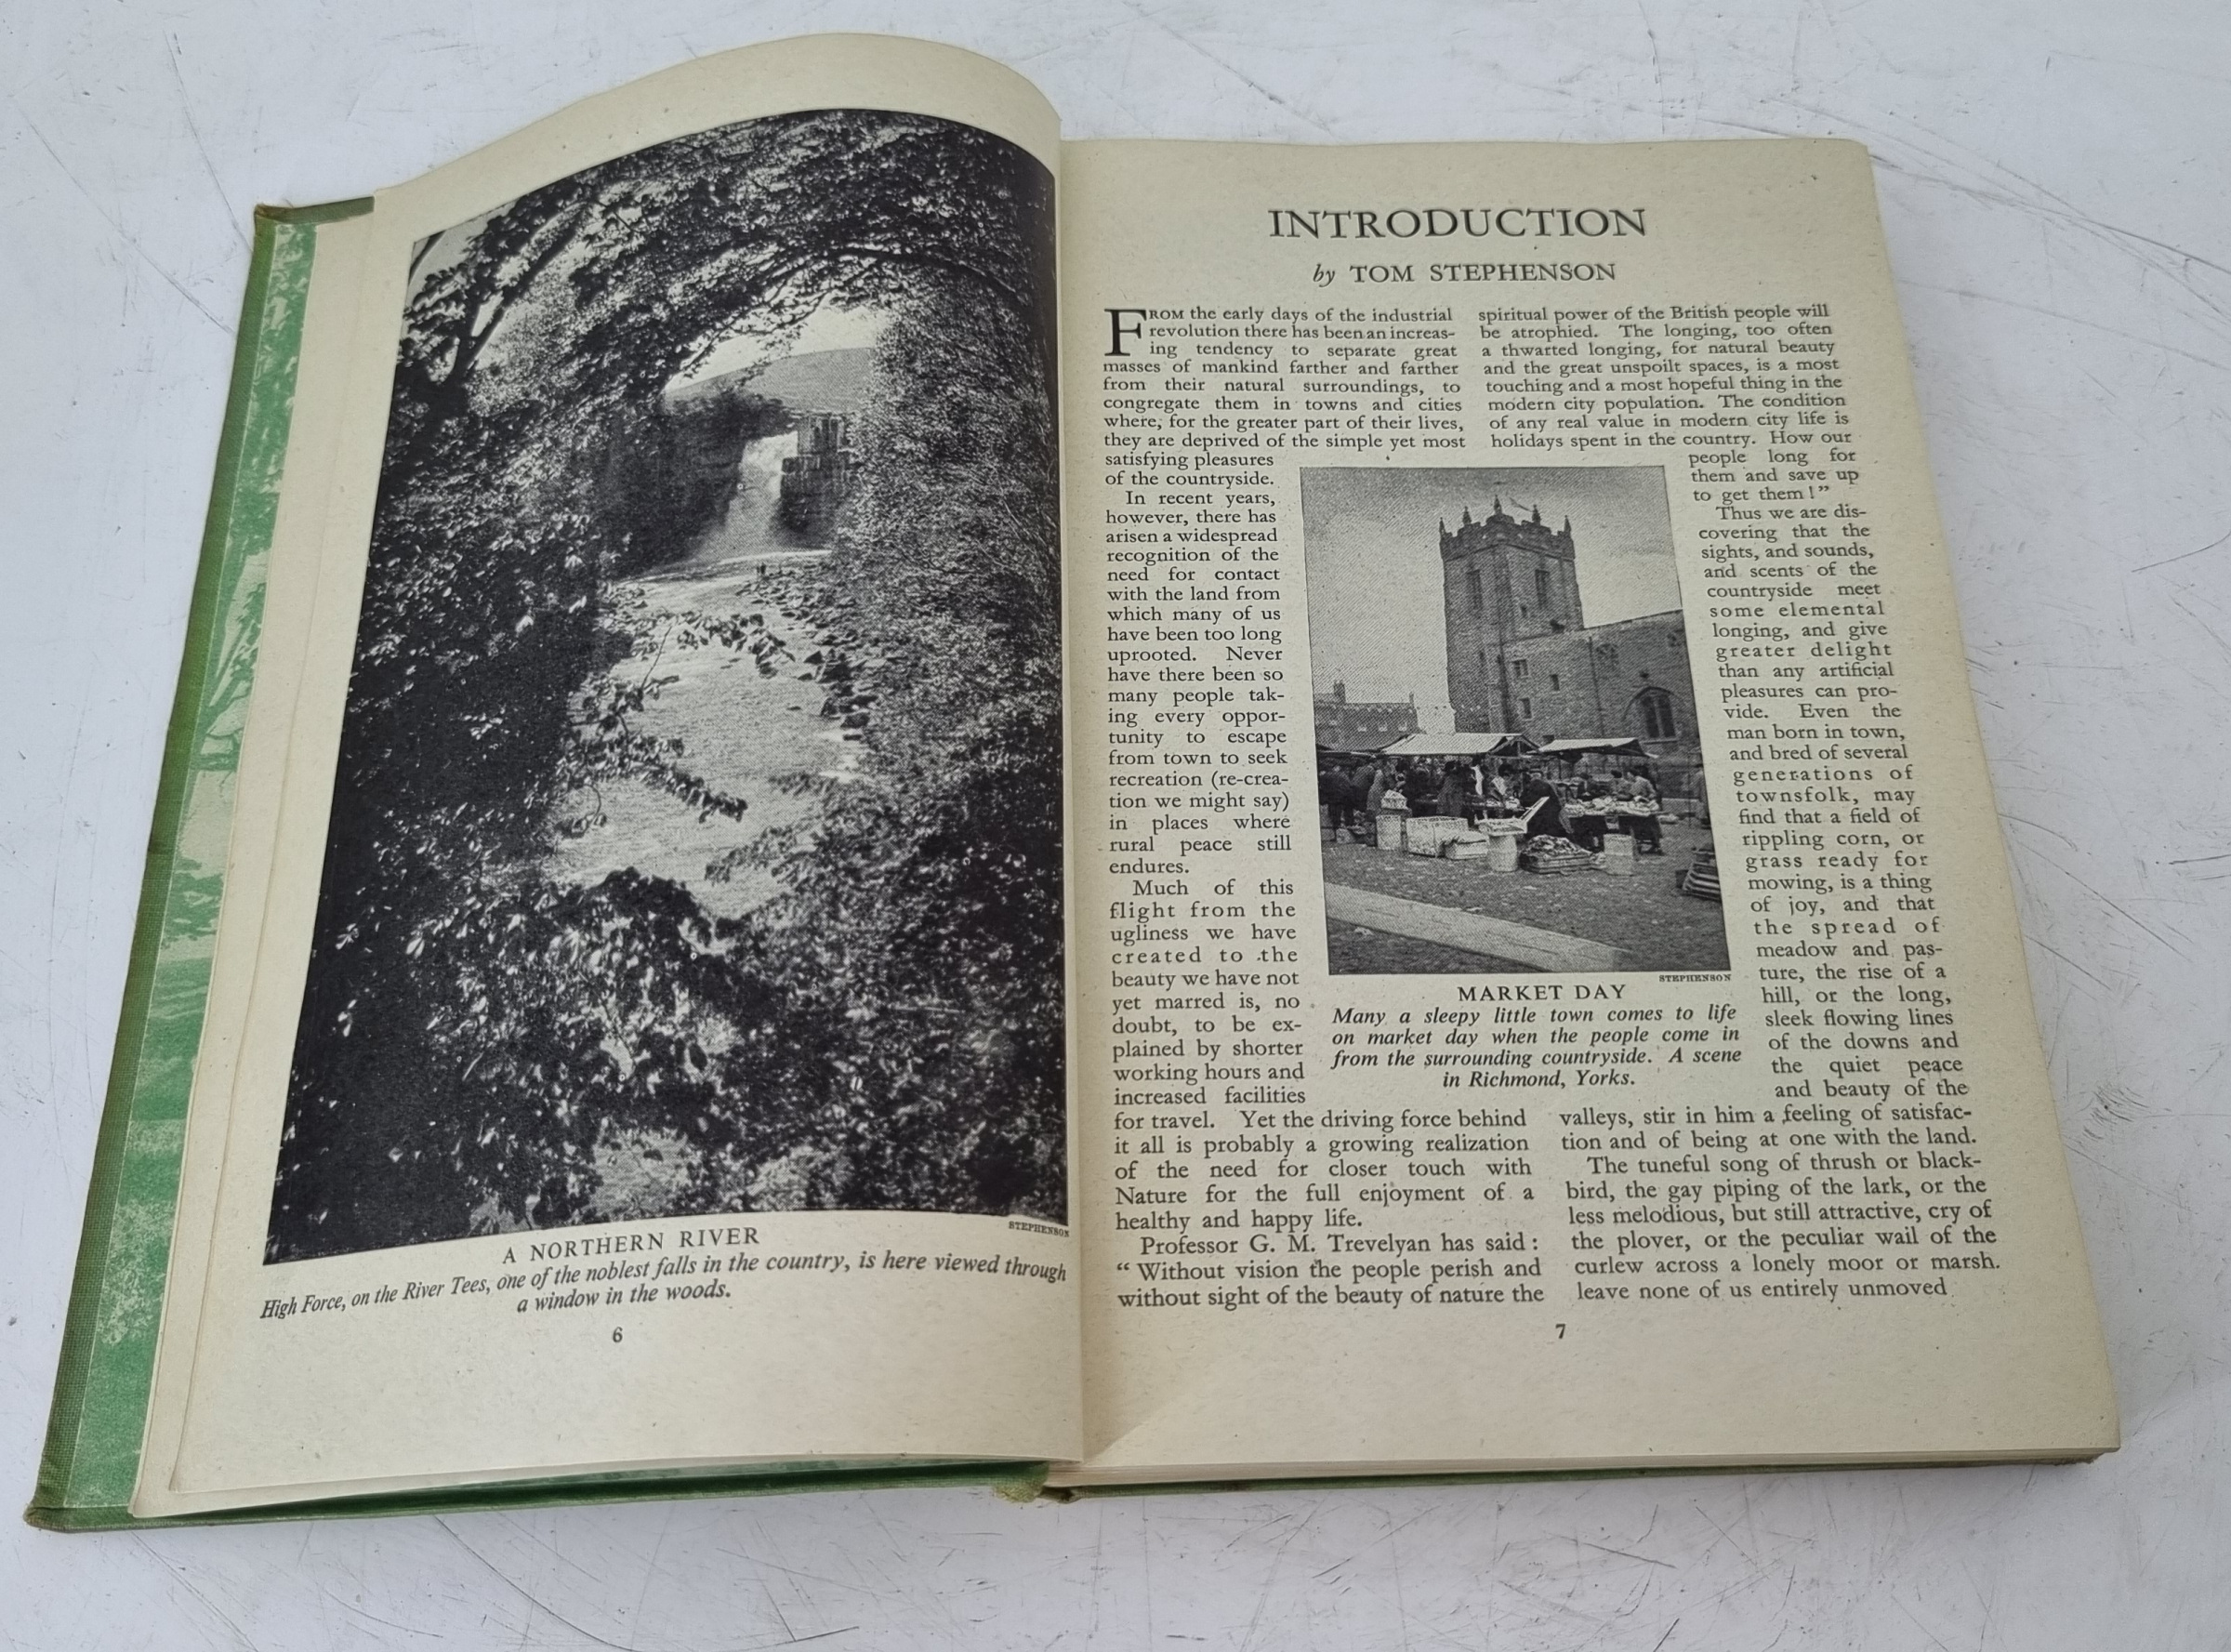 The Good Earth by Pearl S Buck - Published Norwich 1955, The Countryside Companion by Tom Stephenson - Image 4 of 13